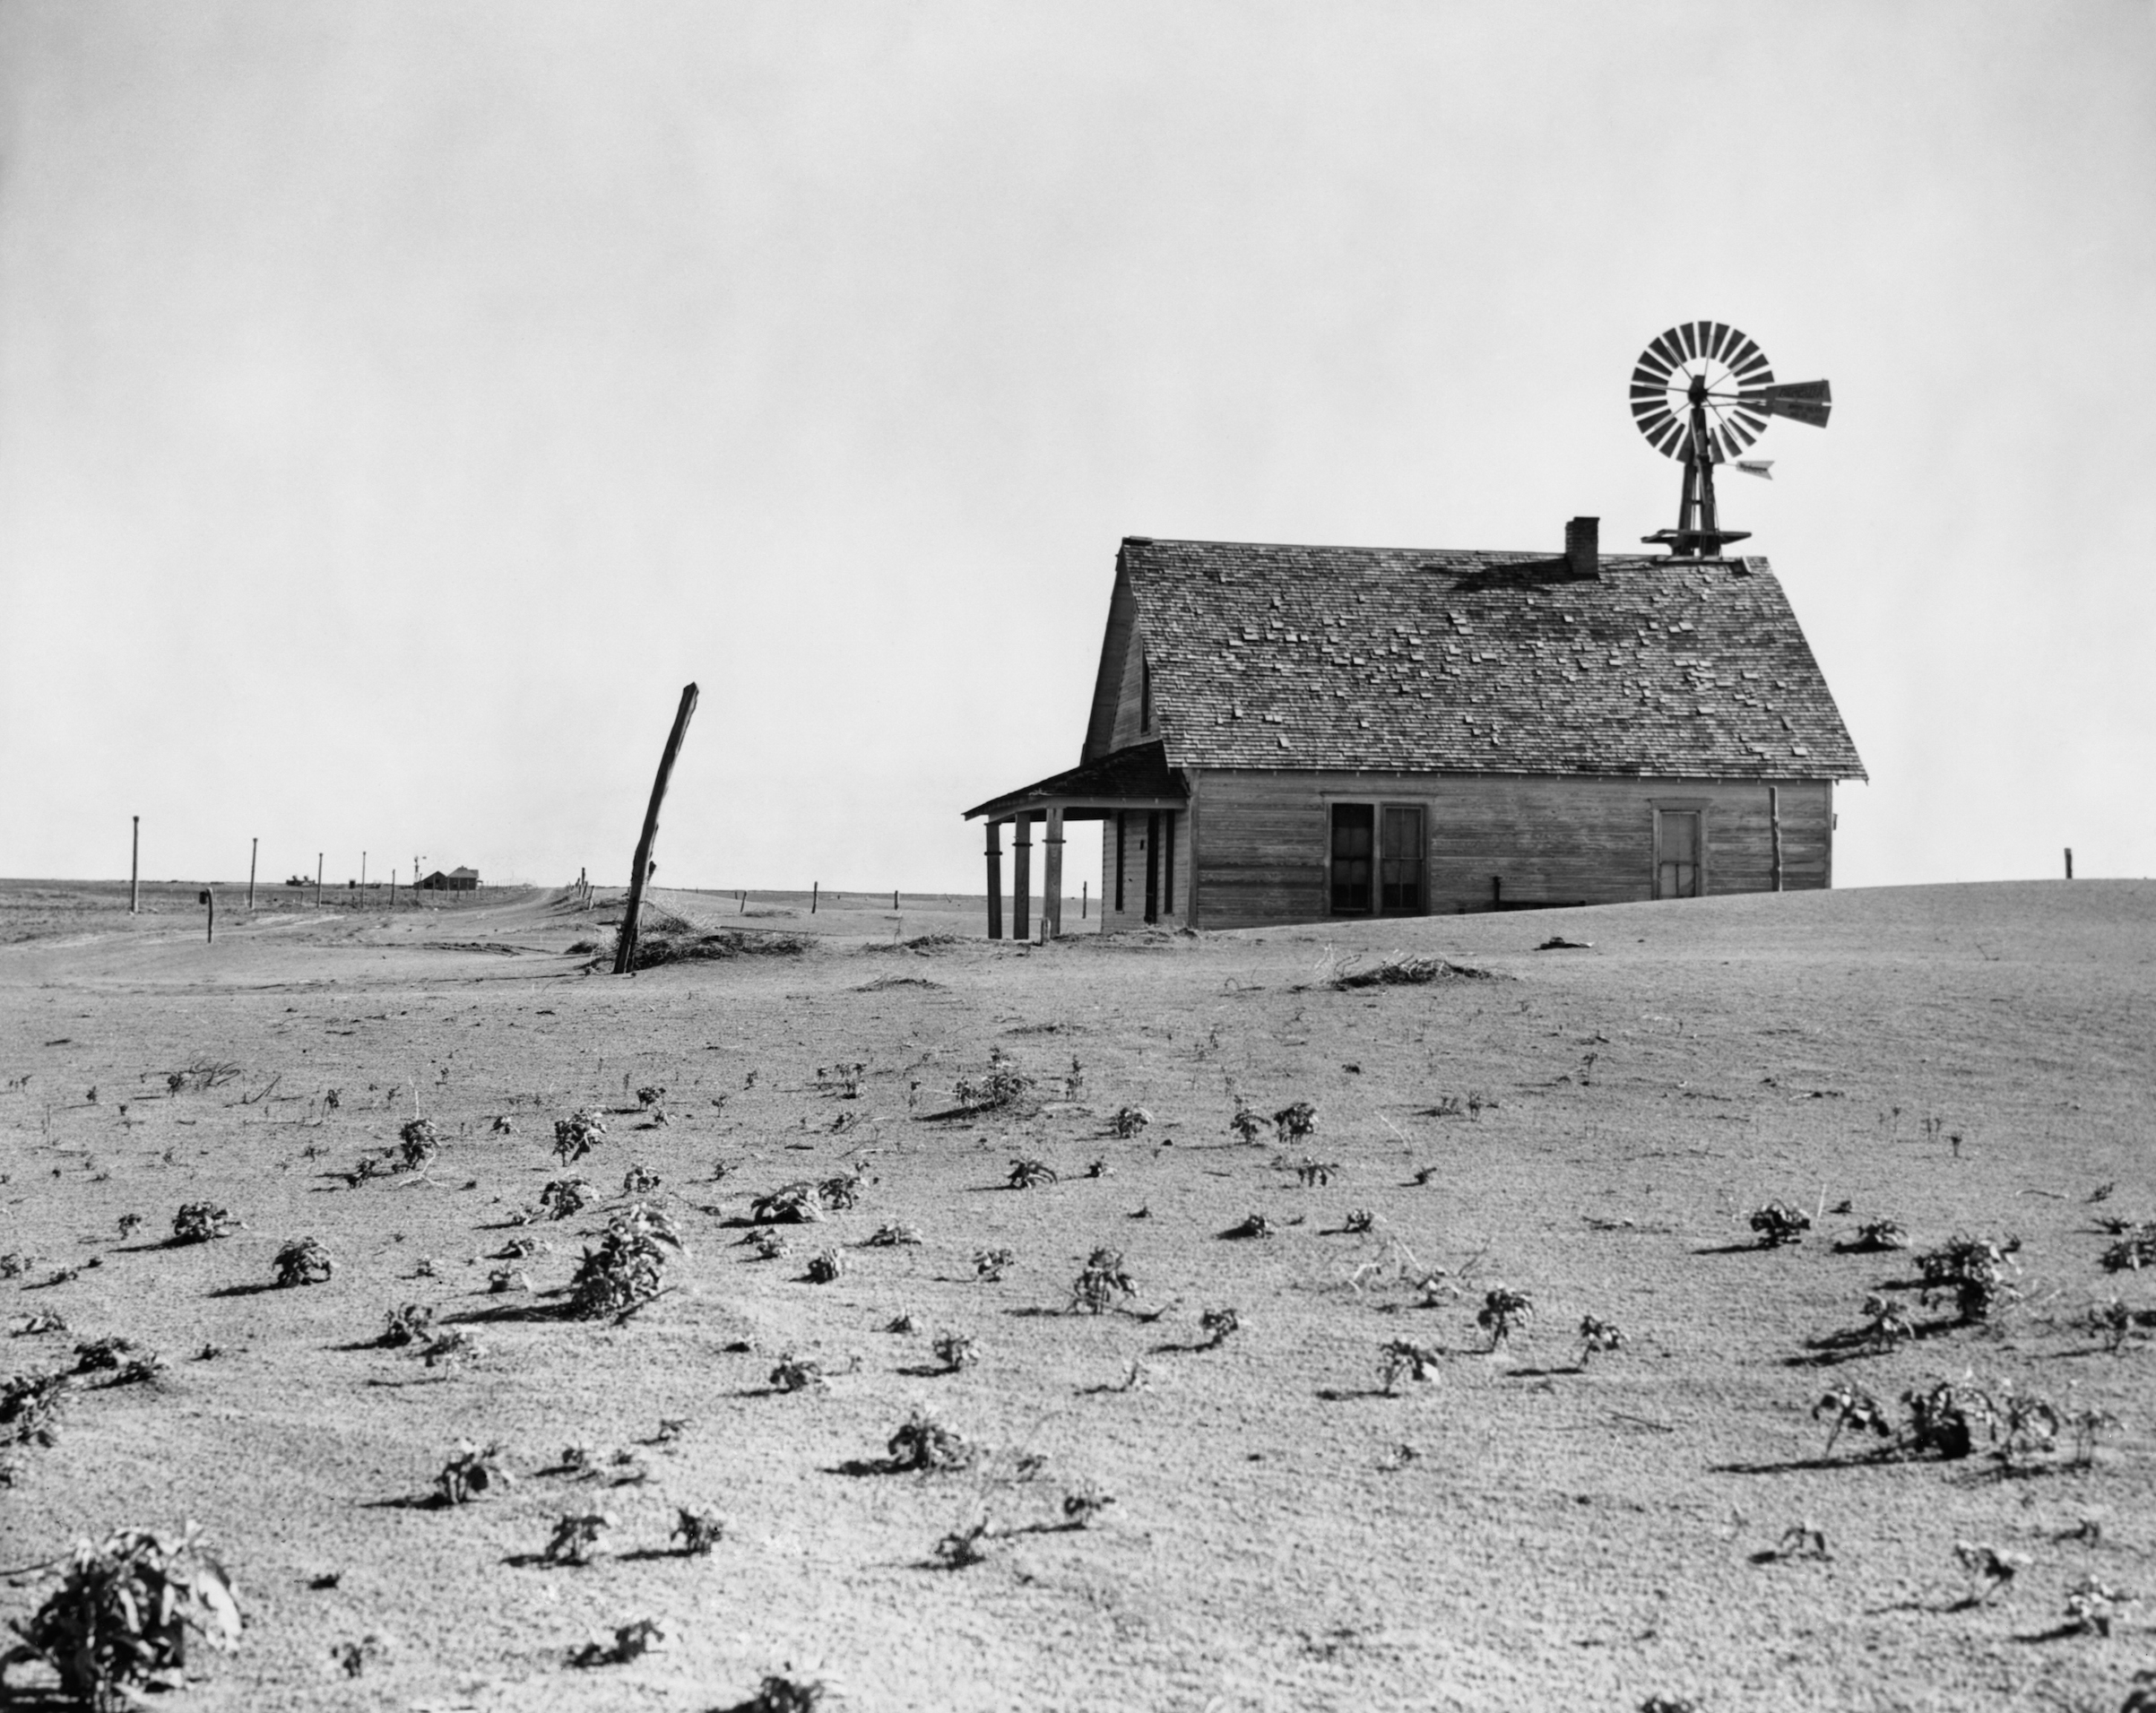 An abandoned farm house in Texas in the late 1930s. (Bettmann/Getty Images)